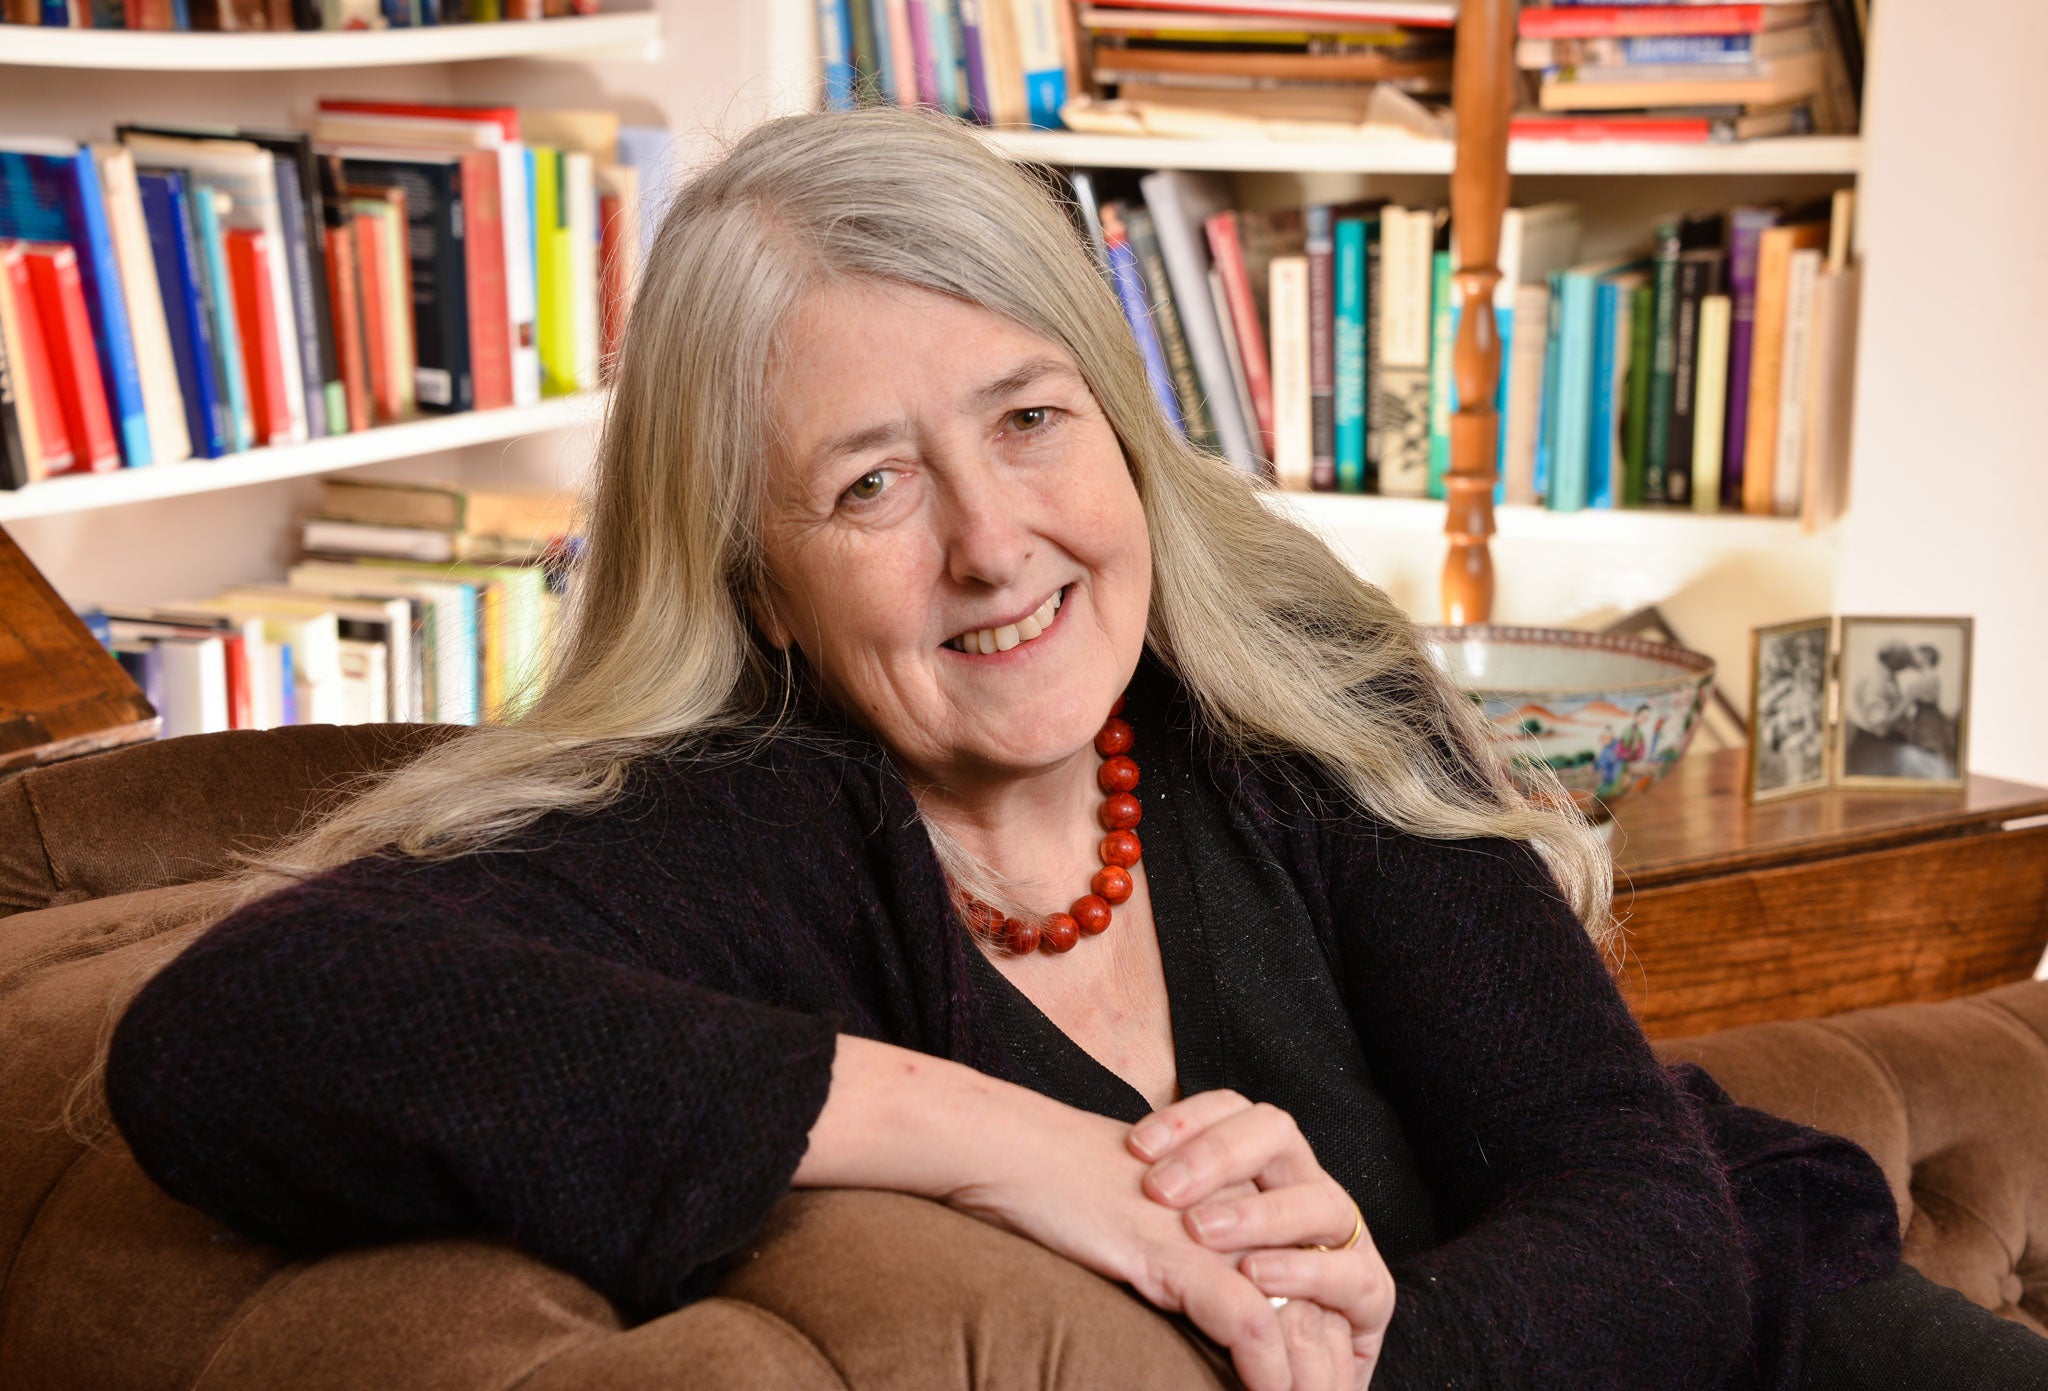 Mary Beard received abuse after speaking positively on 'Question Time' about immigrant workers: 'When people say ridiculous, untrue and hurtful things, then I think you should call them out'